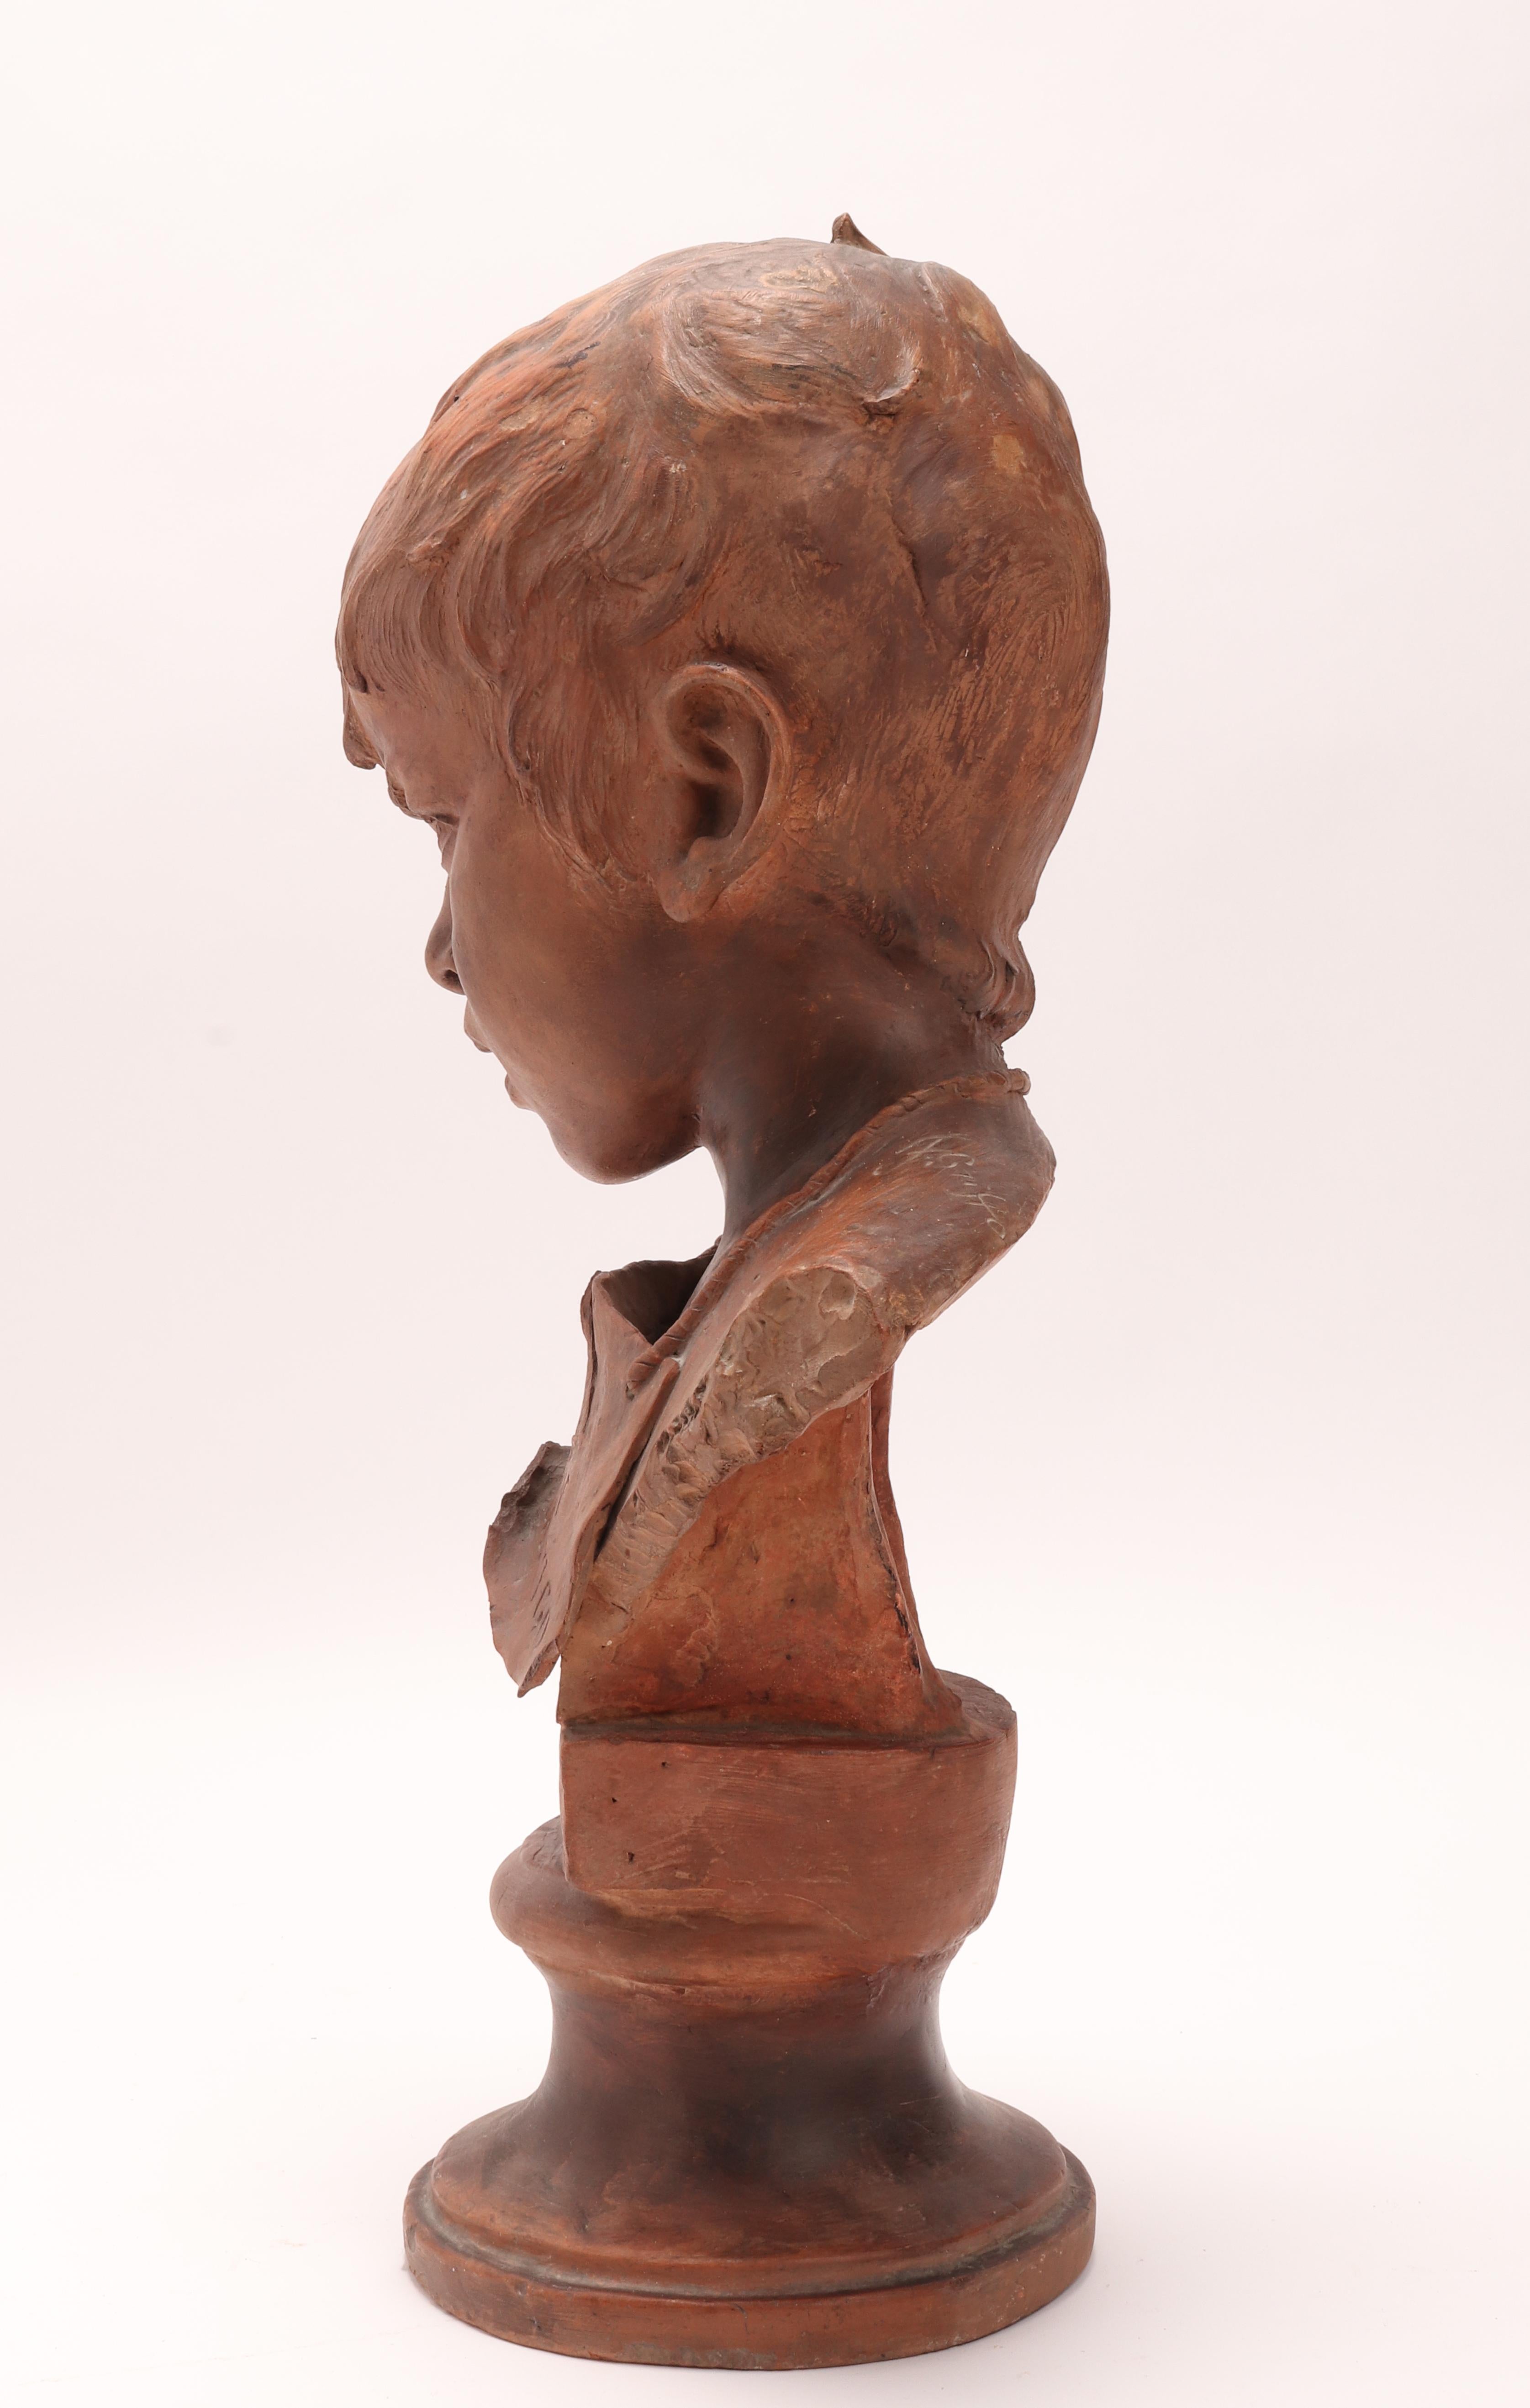 Italian Head of a Young Roguish Child by Francesco Griffo, Italy 1900